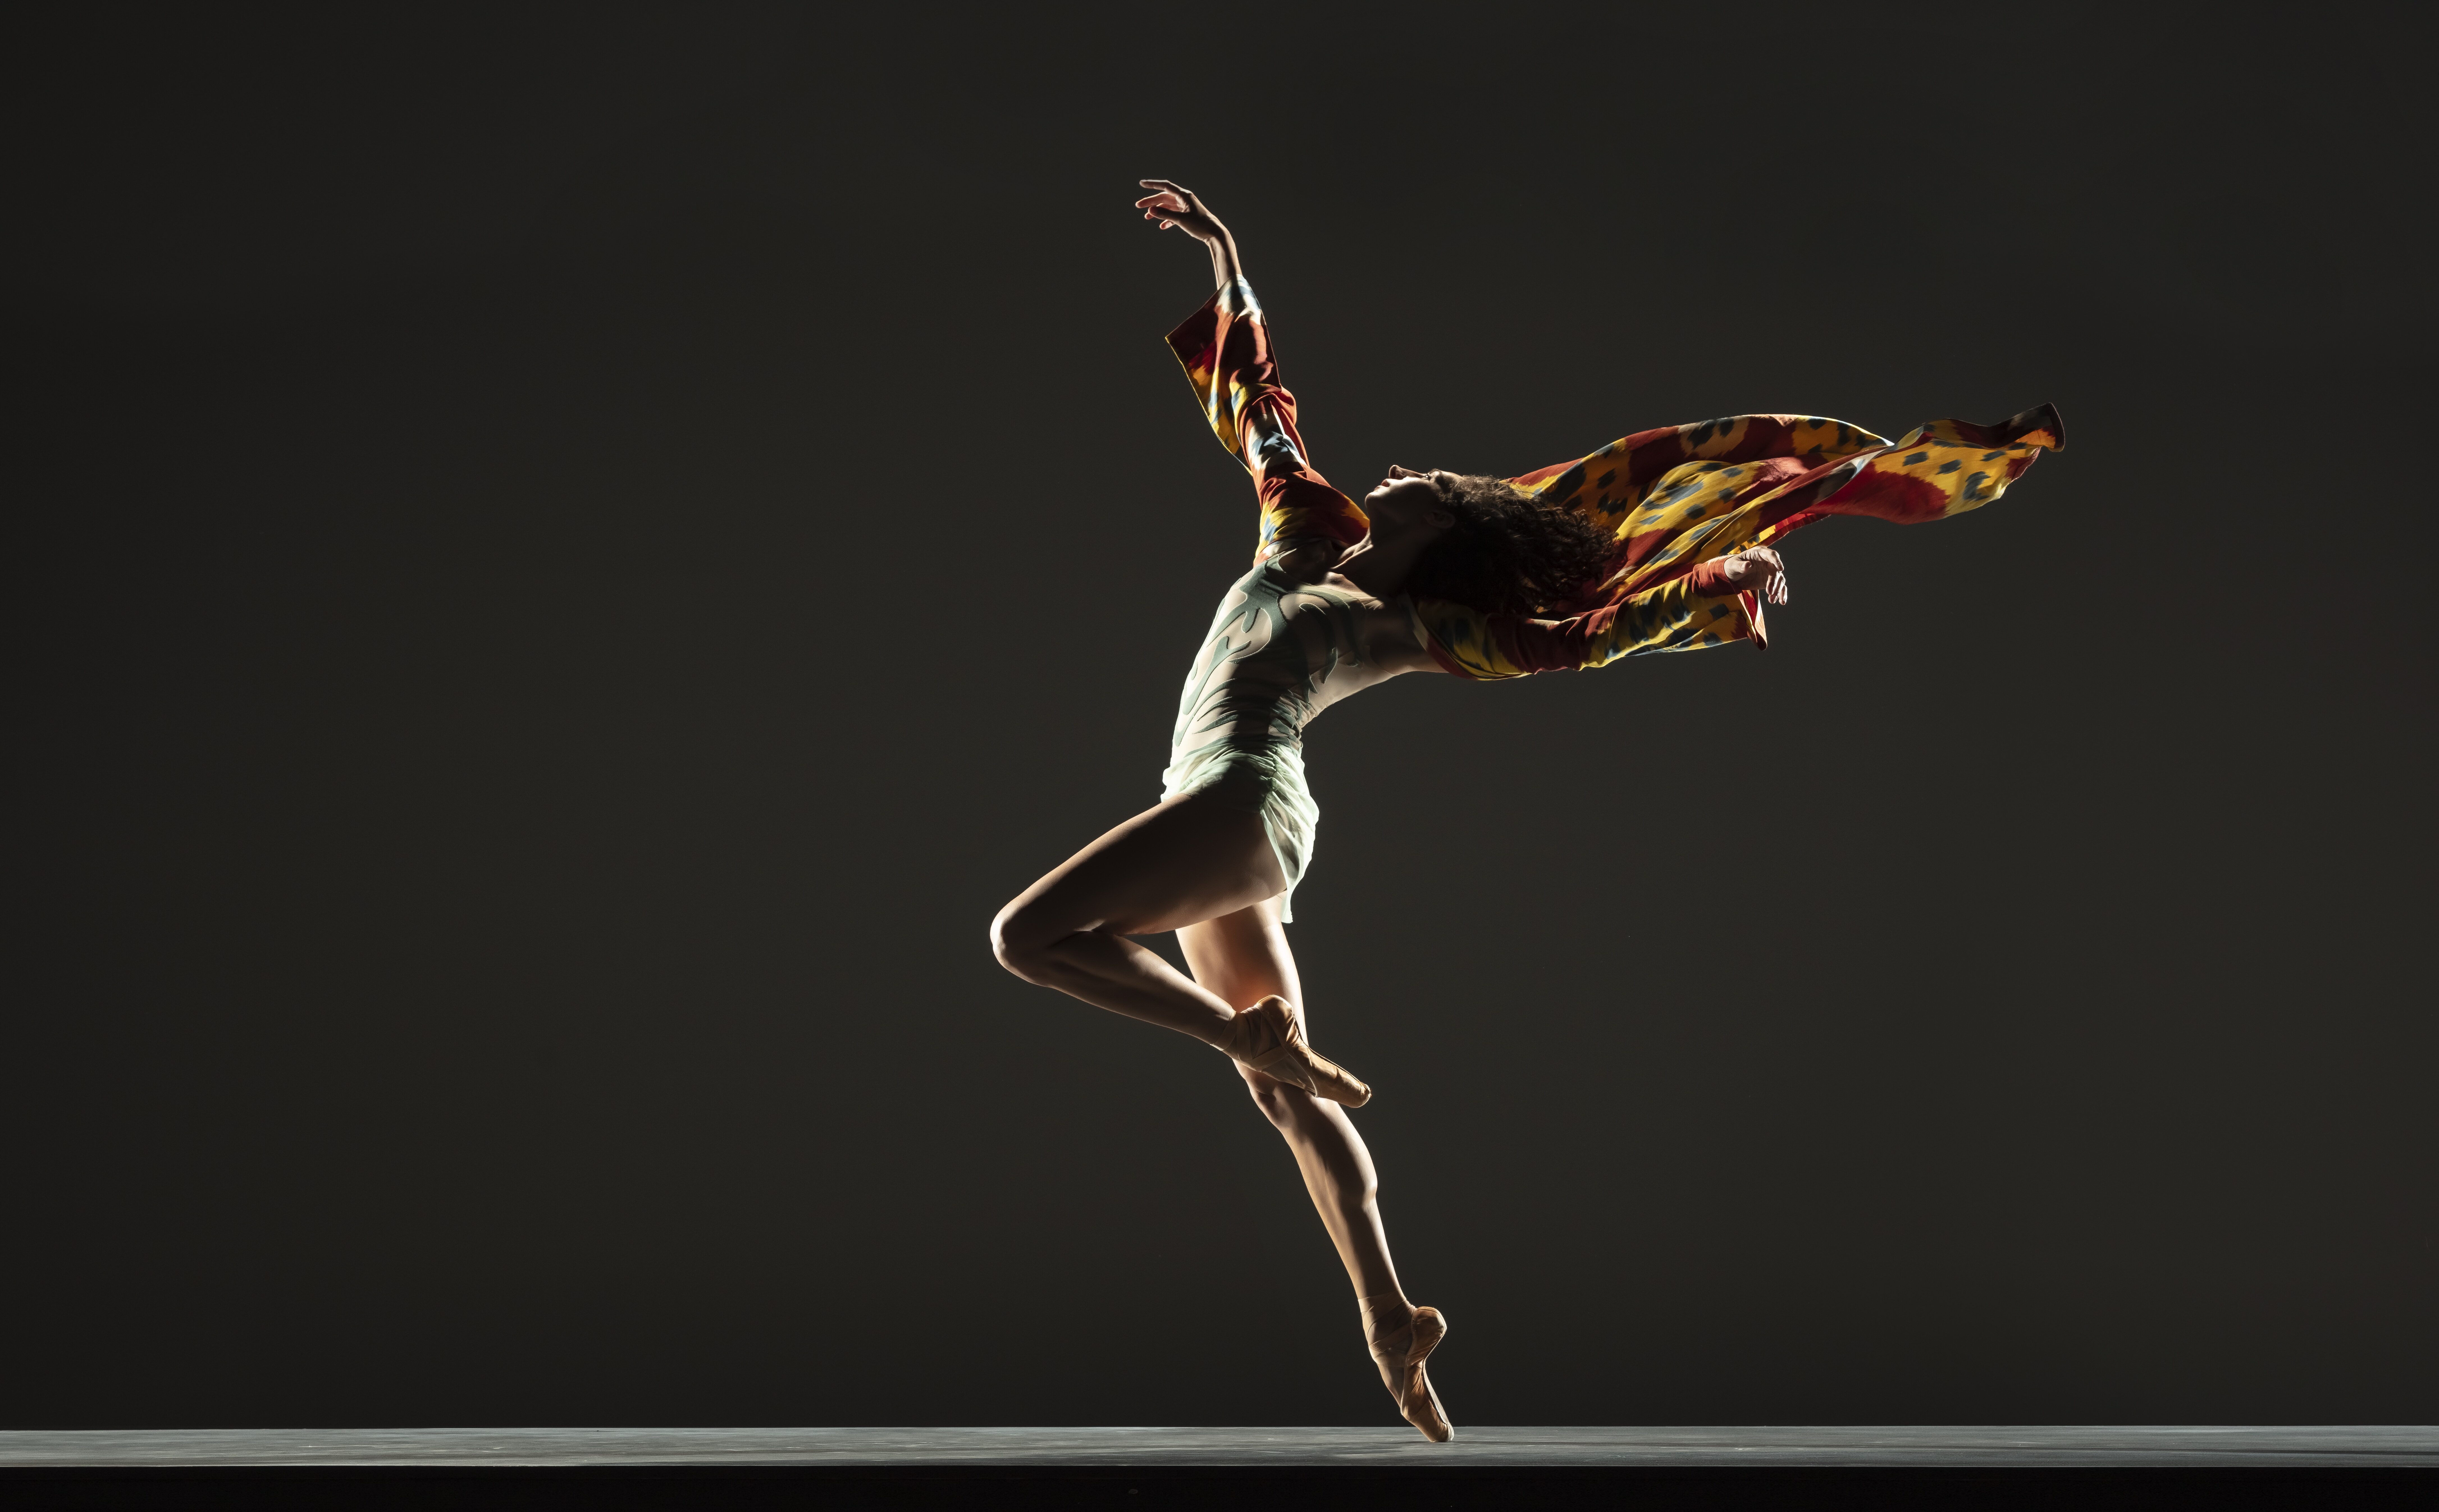 LINES Ballet company dancer Ilaria Guerra in passé en pointe, back arched and arms extended as a maroon and yellow cape wafts behind her shoulders